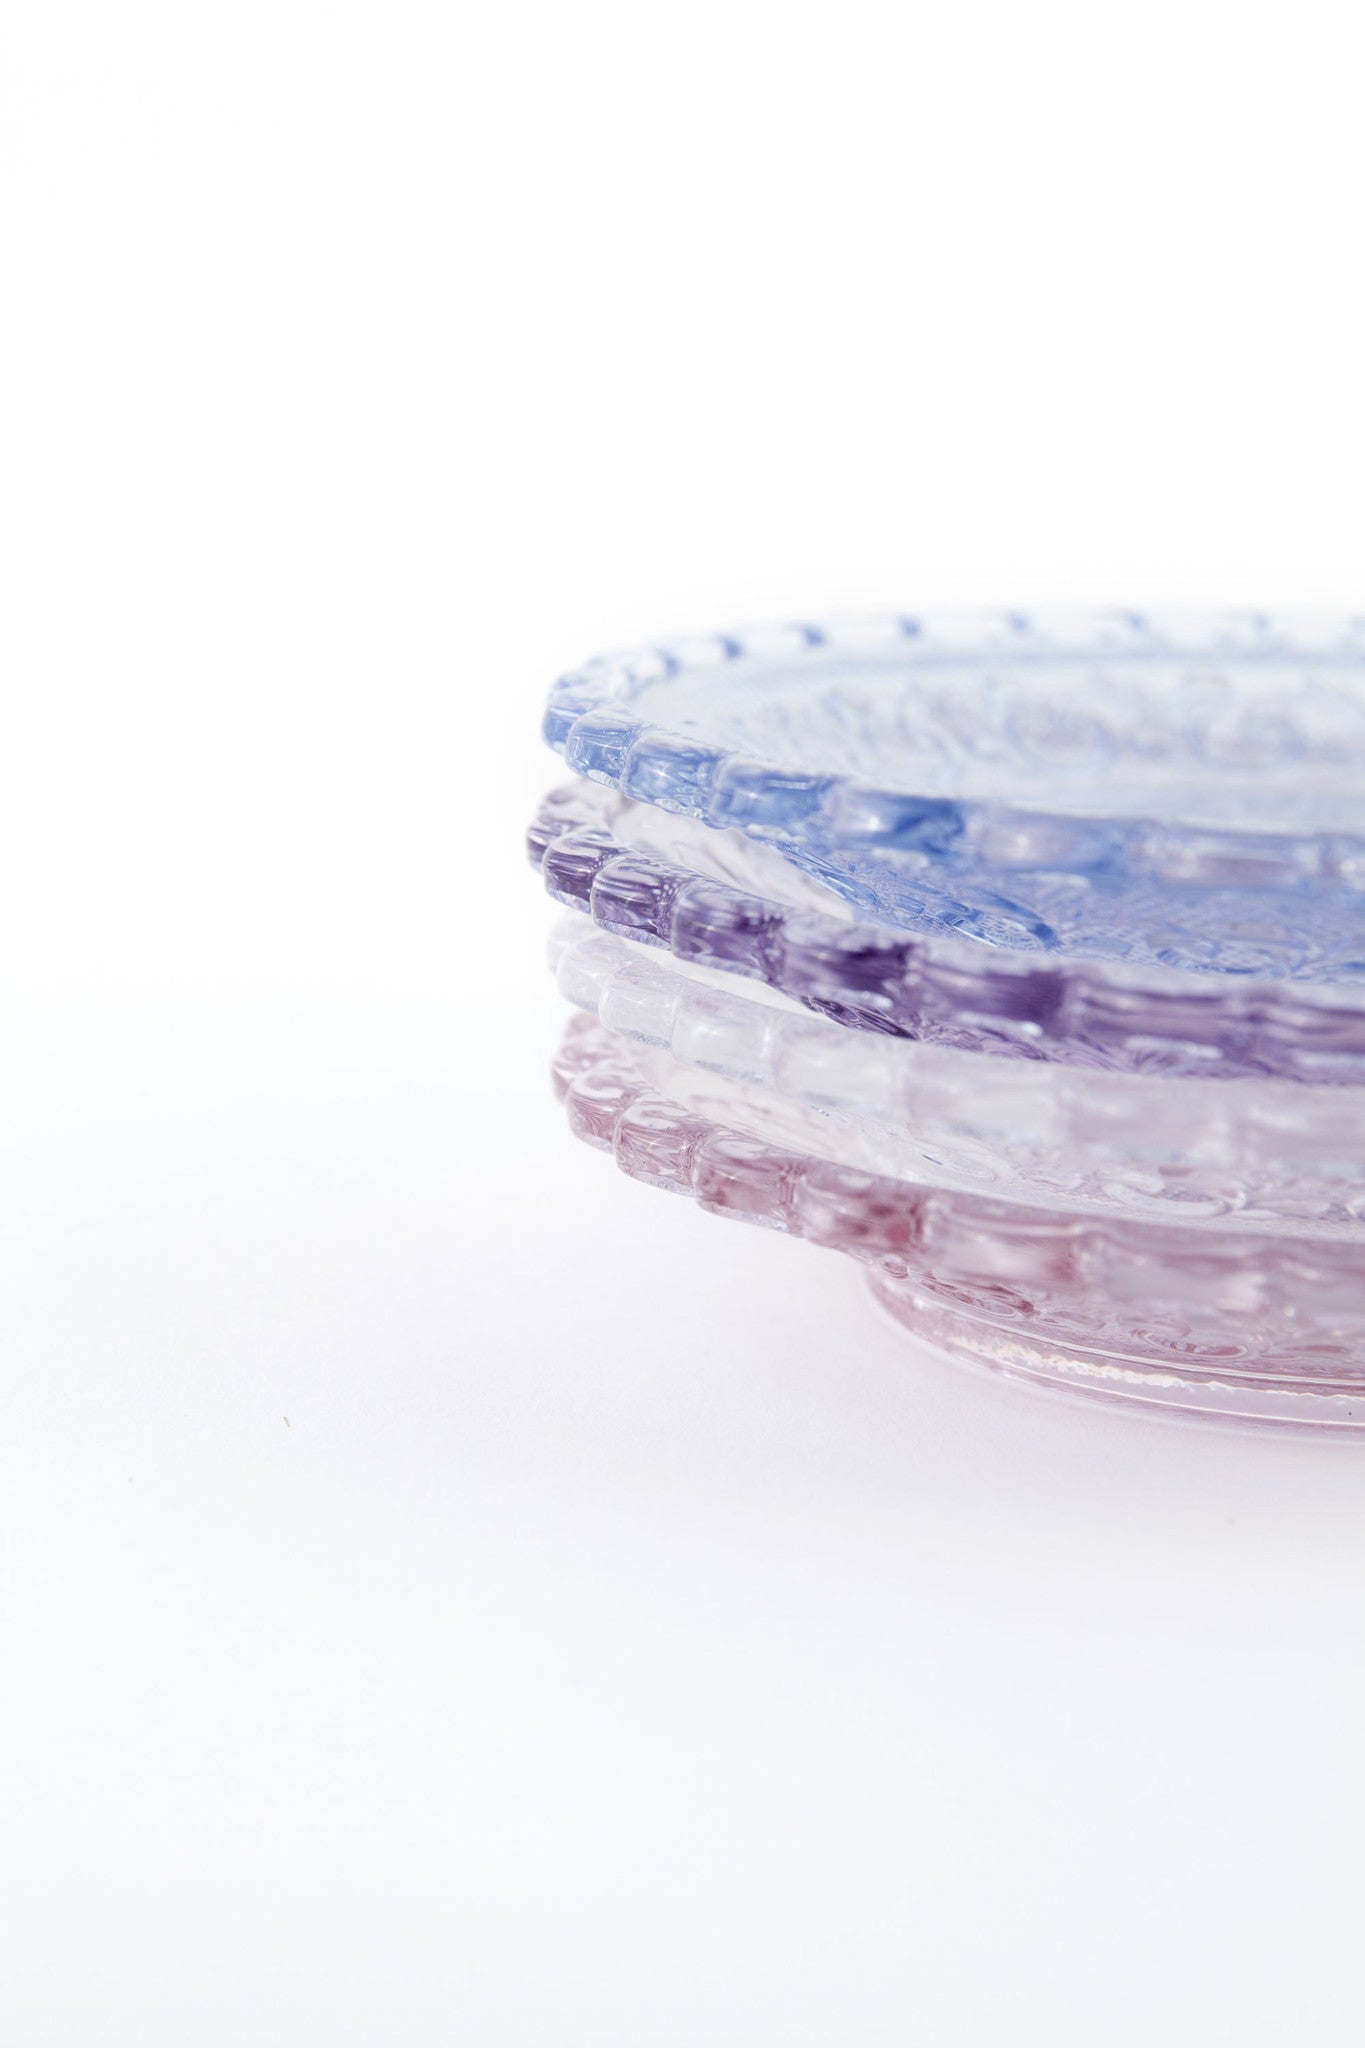 Dentelle Chantilly Glass Plate Glass Dentelle Brand_Dentelle Dentelle Glass Plates Dinnerware_Bowls & Plates Home_Decor Kitchen_Serveware Spring Collection Chantilly_Stack_A_df74c5ad-db2d-49e8-a6f1-b25b788a0c62